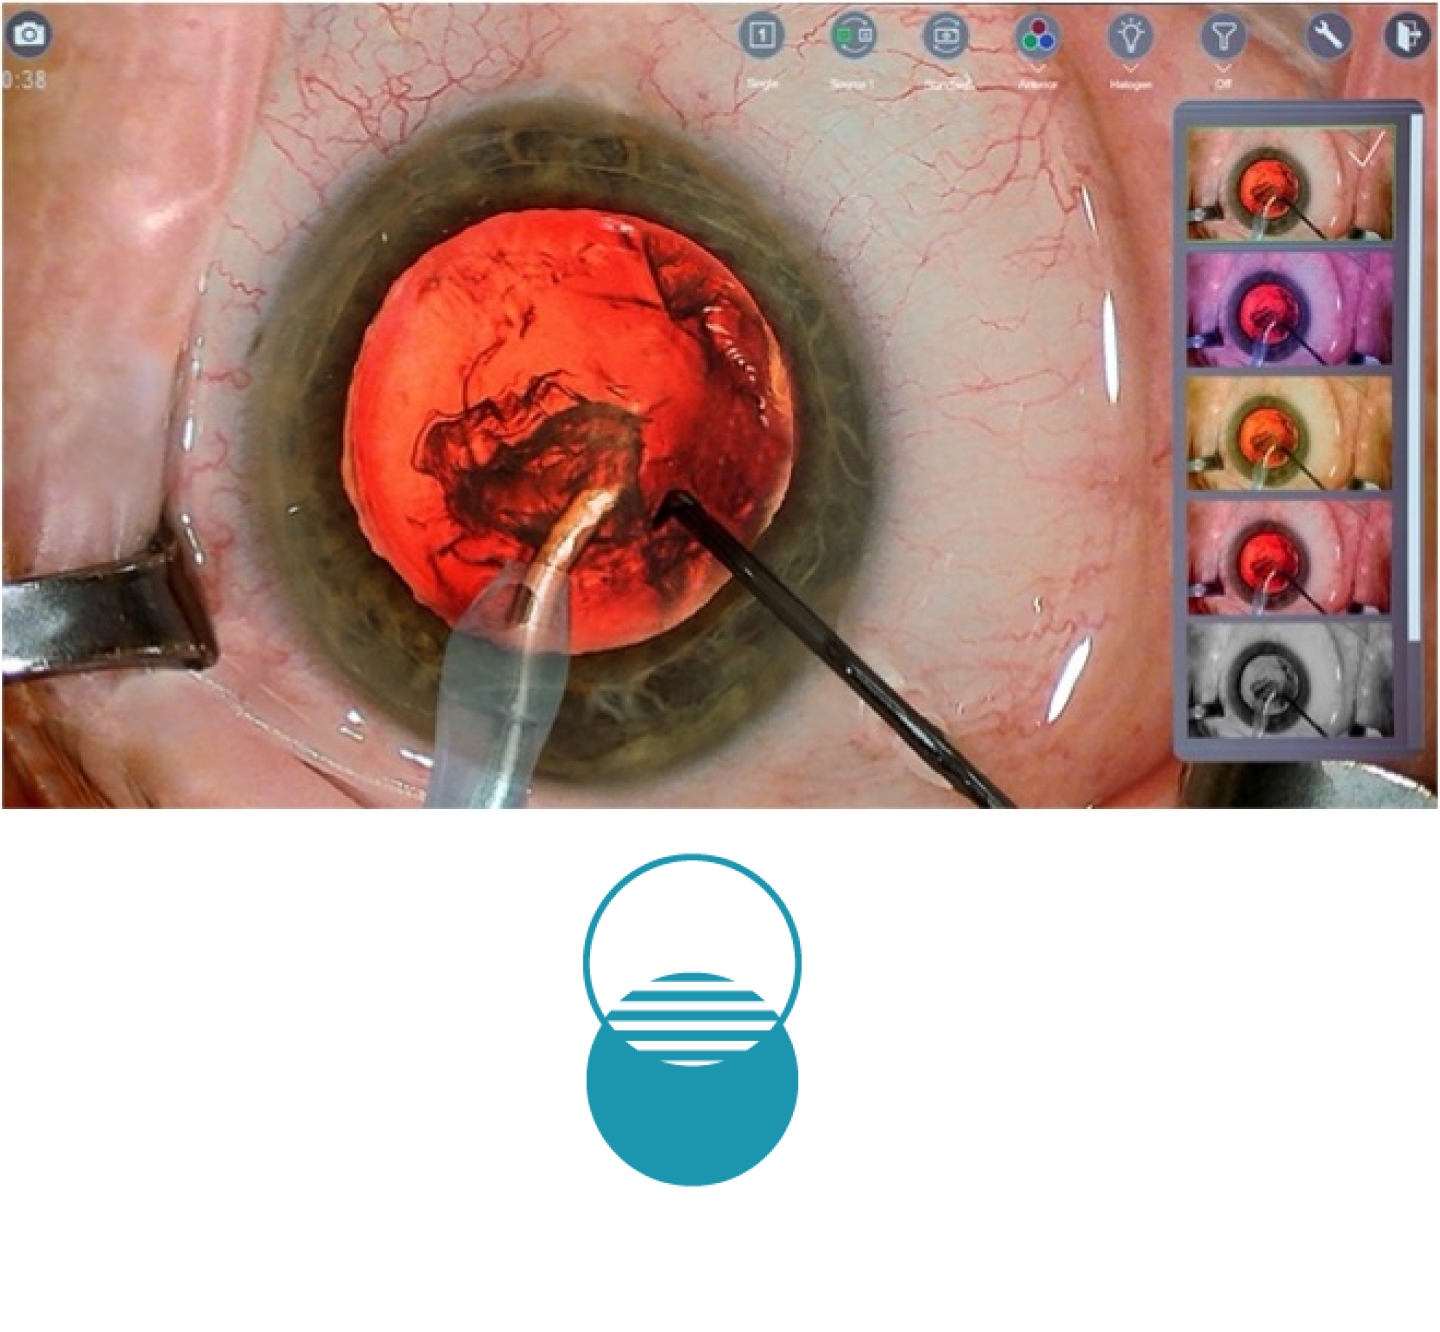 A closeup image of an eye during surgery, with surgical tools on screen with blue icon